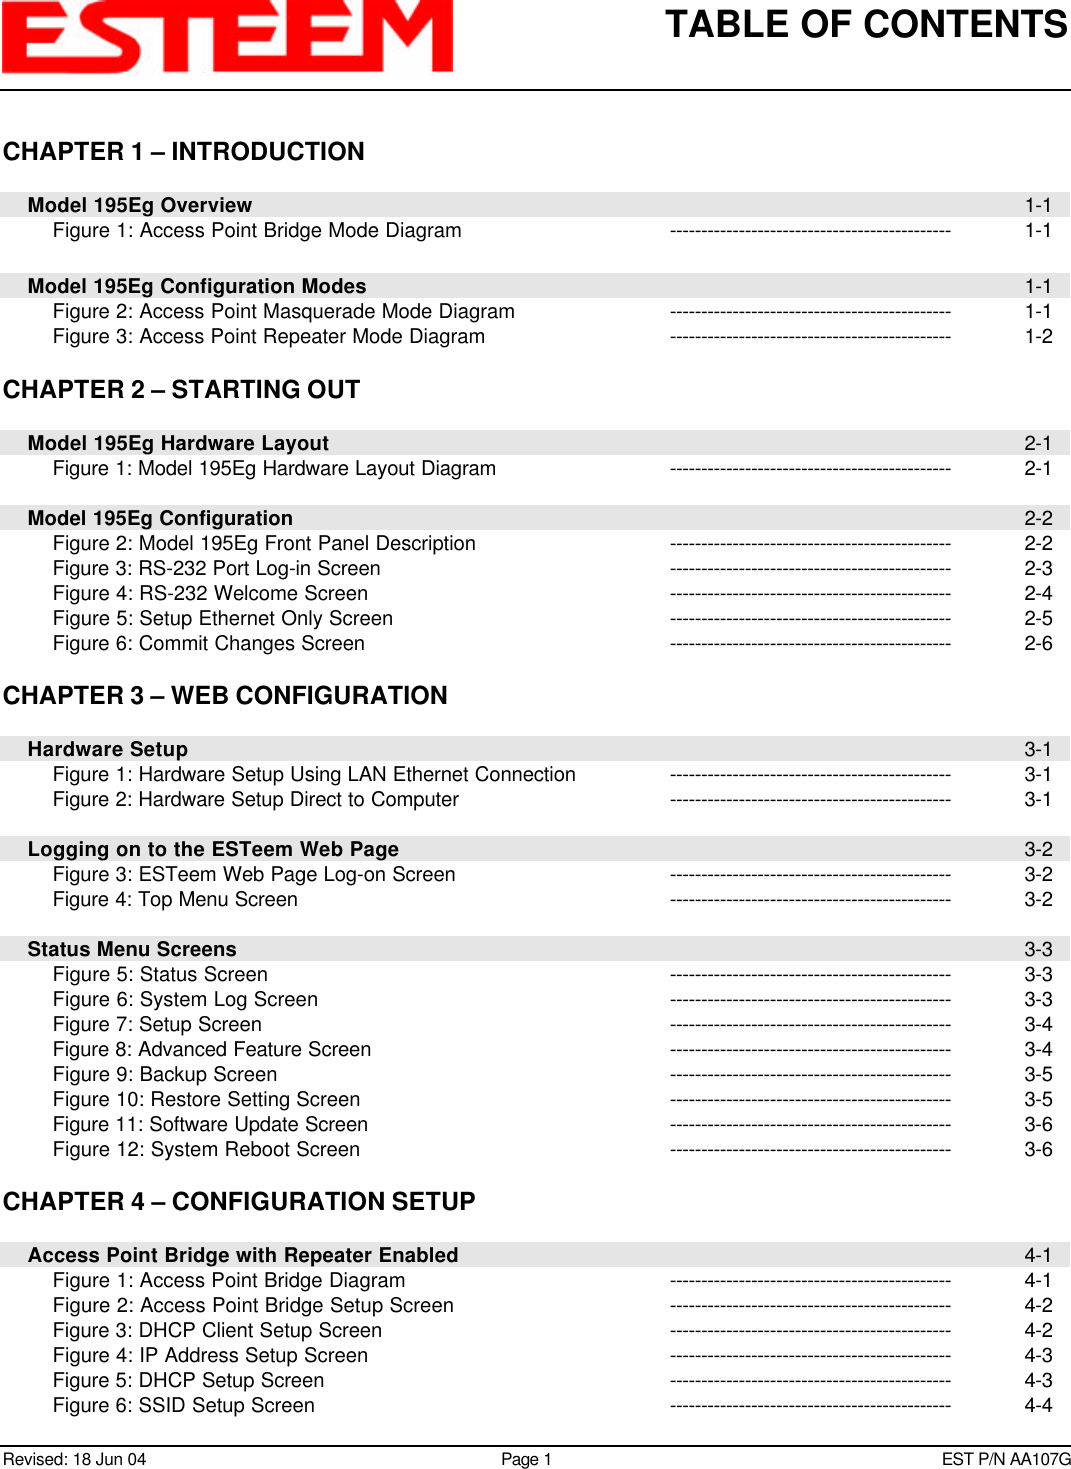 TABLE OF CONTENTSRevised: 18 Jun 04 Page 1EST P/N AA107GCHAPTER 1 – INTRODUCTION    Model 195Eg Overview 1-1        Figure 1: Access Point Bridge Mode Diagram --------------------------------------------- 1-1    Model 195Eg Configuration Modes 1-1        Figure 2: Access Point Masquerade Mode Diagram --------------------------------------------- 1-1        Figure 3: Access Point Repeater Mode Diagram --------------------------------------------- 1-2CHAPTER 2 – STARTING OUT    Model 195Eg Hardware Layout 2-1        Figure 1: Model 195Eg Hardware Layout Diagram --------------------------------------------- 2-1    Model 195Eg Configuration 2-2        Figure 2: Model 195Eg Front Panel Description --------------------------------------------- 2-2        Figure 3: RS-232 Port Log-in Screen --------------------------------------------- 2-3        Figure 4: RS-232 Welcome Screen --------------------------------------------- 2-4        Figure 5: Setup Ethernet Only Screen --------------------------------------------- 2-5        Figure 6: Commit Changes Screen --------------------------------------------- 2-6CHAPTER 3 – WEB CONFIGURATION    Hardware Setup 3-1        Figure 1: Hardware Setup Using LAN Ethernet Connection --------------------------------------------- 3-1        Figure 2: Hardware Setup Direct to Computer --------------------------------------------- 3-1    Logging on to the ESTeem Web Page 3-2        Figure 3: ESTeem Web Page Log-on Screen --------------------------------------------- 3-2        Figure 4: Top Menu Screen --------------------------------------------- 3-2    Status Menu Screens 3-3        Figure 5: Status Screen --------------------------------------------- 3-3        Figure 6: System Log Screen --------------------------------------------- 3-3        Figure 7: Setup Screen --------------------------------------------- 3-4        Figure 8: Advanced Feature Screen --------------------------------------------- 3-4        Figure 9: Backup Screen --------------------------------------------- 3-5        Figure 10: Restore Setting Screen --------------------------------------------- 3-5        Figure 11: Software Update Screen --------------------------------------------- 3-6        Figure 12: System Reboot Screen --------------------------------------------- 3-6CHAPTER 4 – CONFIGURATION SETUP    Access Point Bridge with Repeater Enabled 4-1        Figure 1: Access Point Bridge Diagram --------------------------------------------- 4-1        Figure 2: Access Point Bridge Setup Screen --------------------------------------------- 4-2        Figure 3: DHCP Client Setup Screen --------------------------------------------- 4-2        Figure 4: IP Address Setup Screen --------------------------------------------- 4-3        Figure 5: DHCP Setup Screen --------------------------------------------- 4-3        Figure 6: SSID Setup Screen --------------------------------------------- 4-4